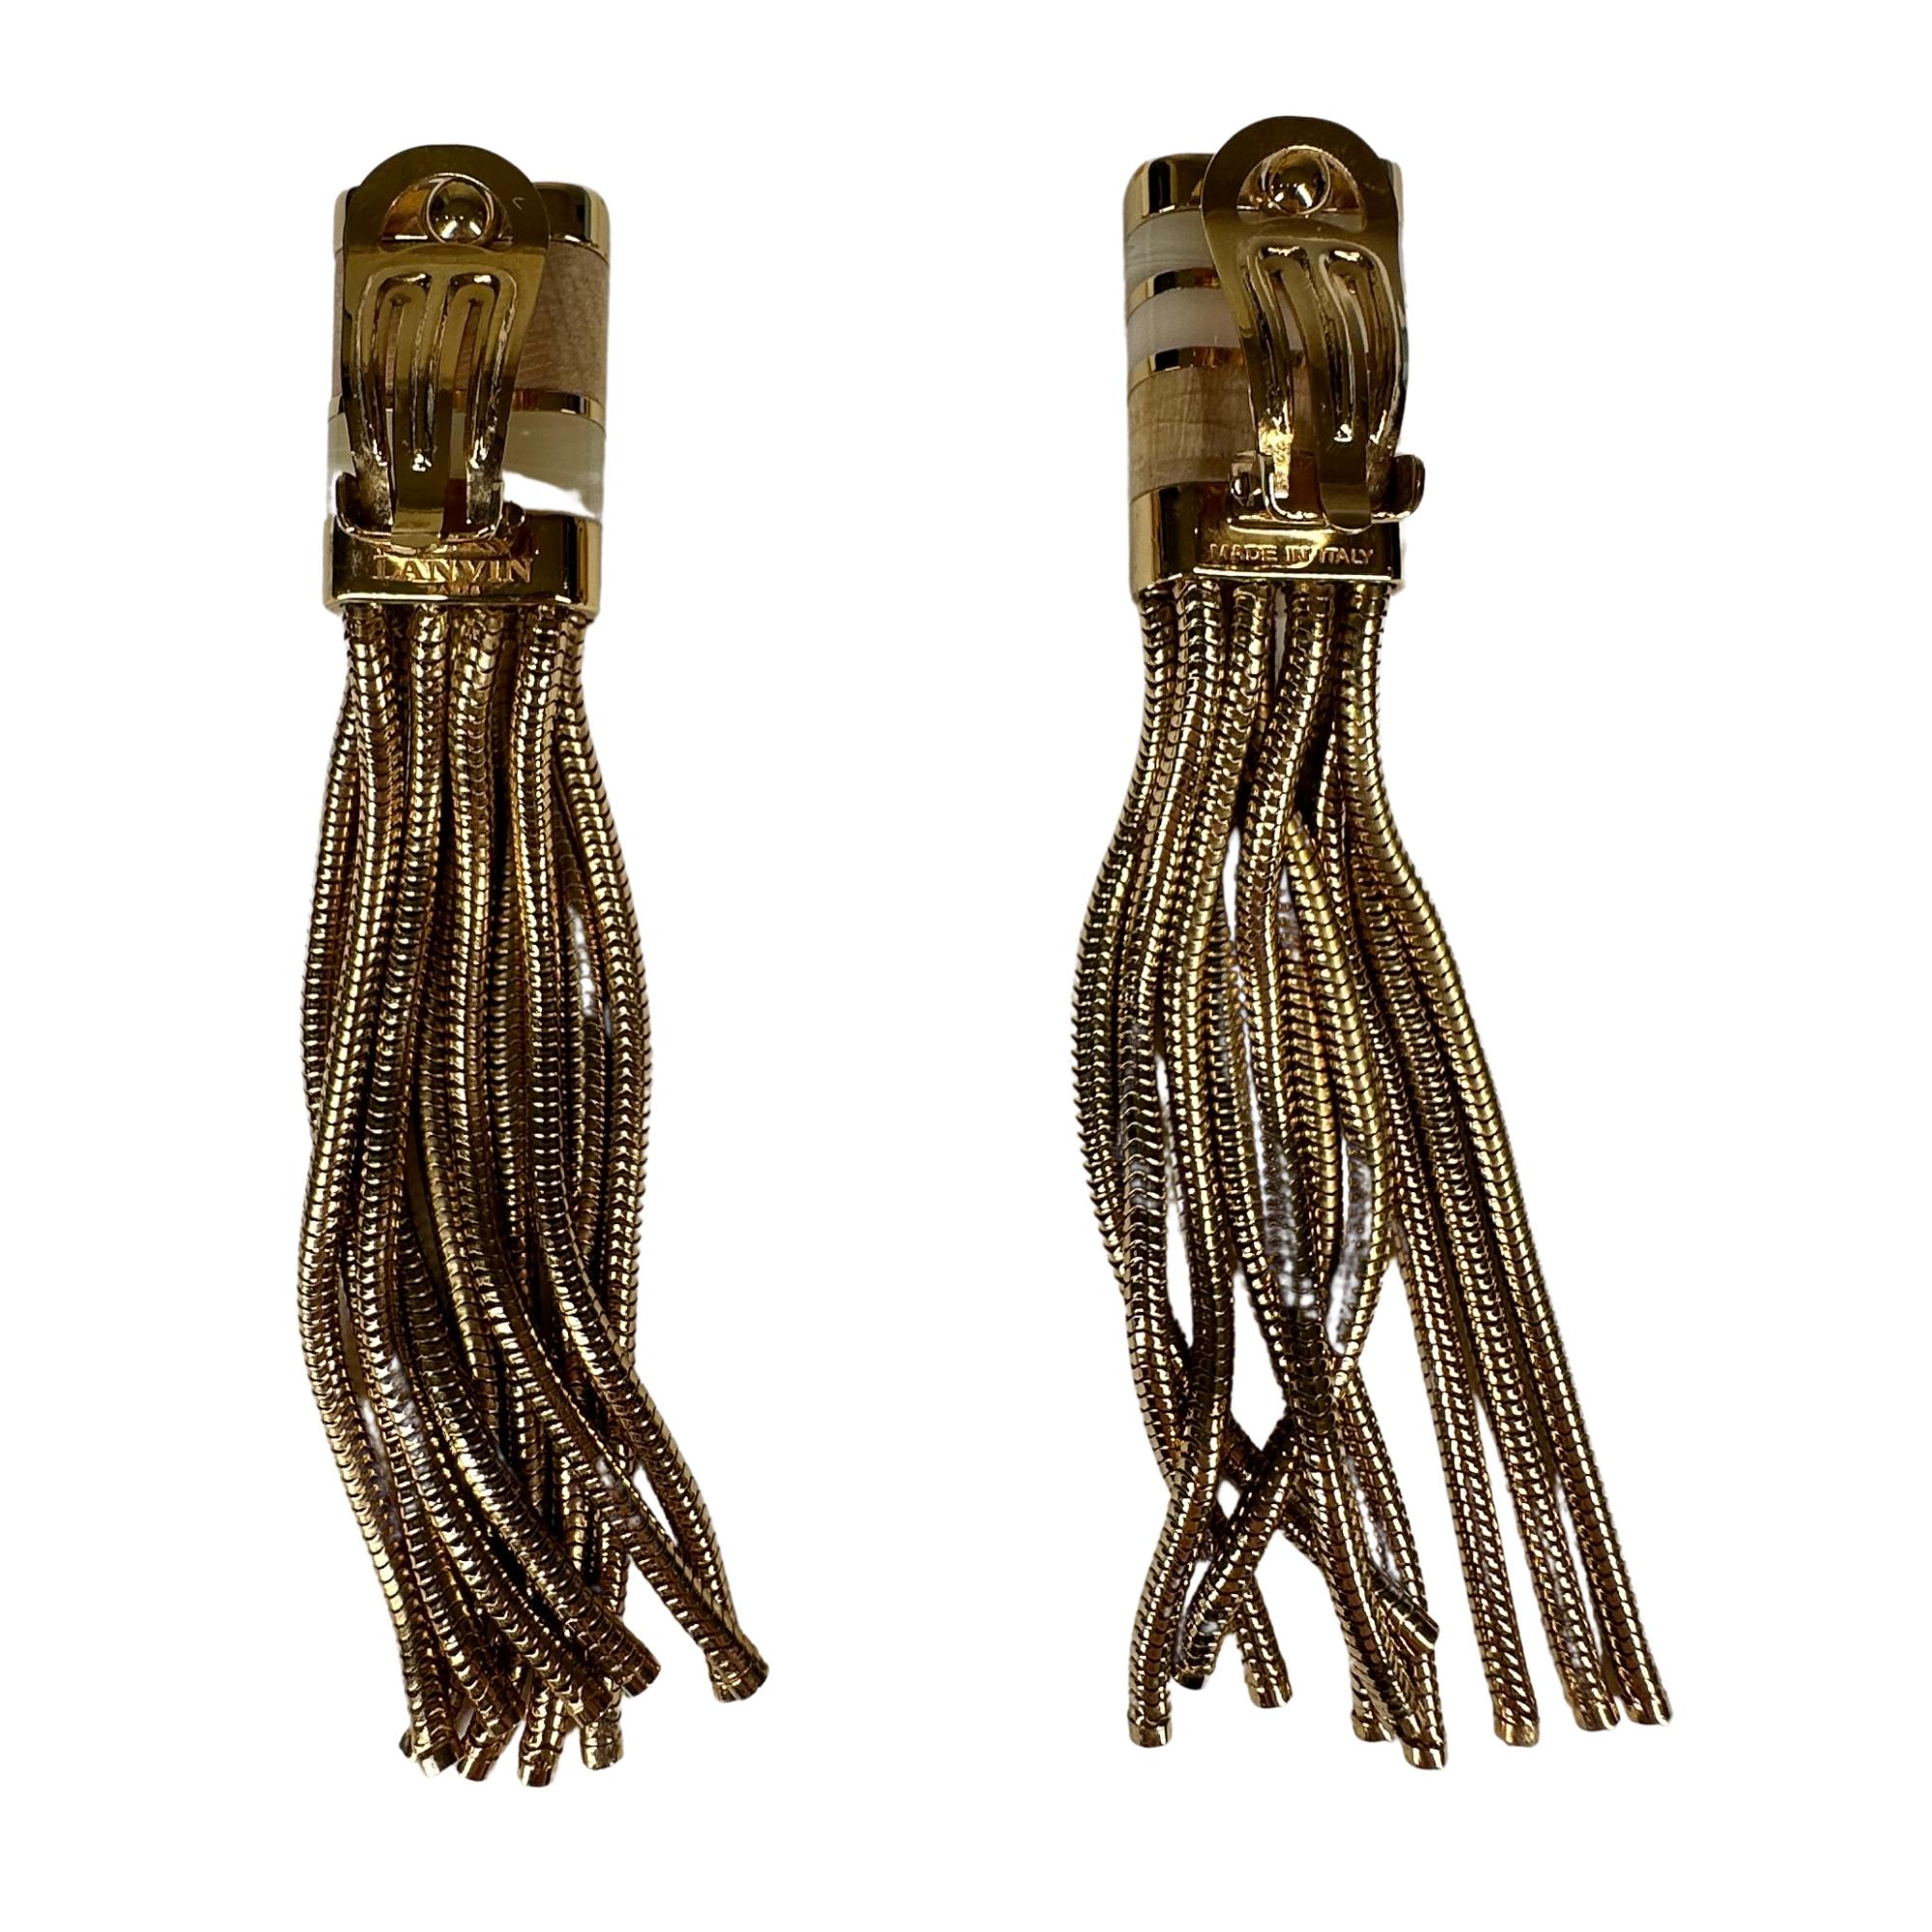 LANVIN GOLD TASSEL METAL CHAIN EARRINGS

Color: Gold tone/neutrals
Material: Metal chain/wood
Marks: Brand mark
Clasp Style: Clip on
Year: Circa 2020s

Measures: Length 3.5” x Width .6 ”
Comes with: Box
Condition: Very good/excellent. Kept in